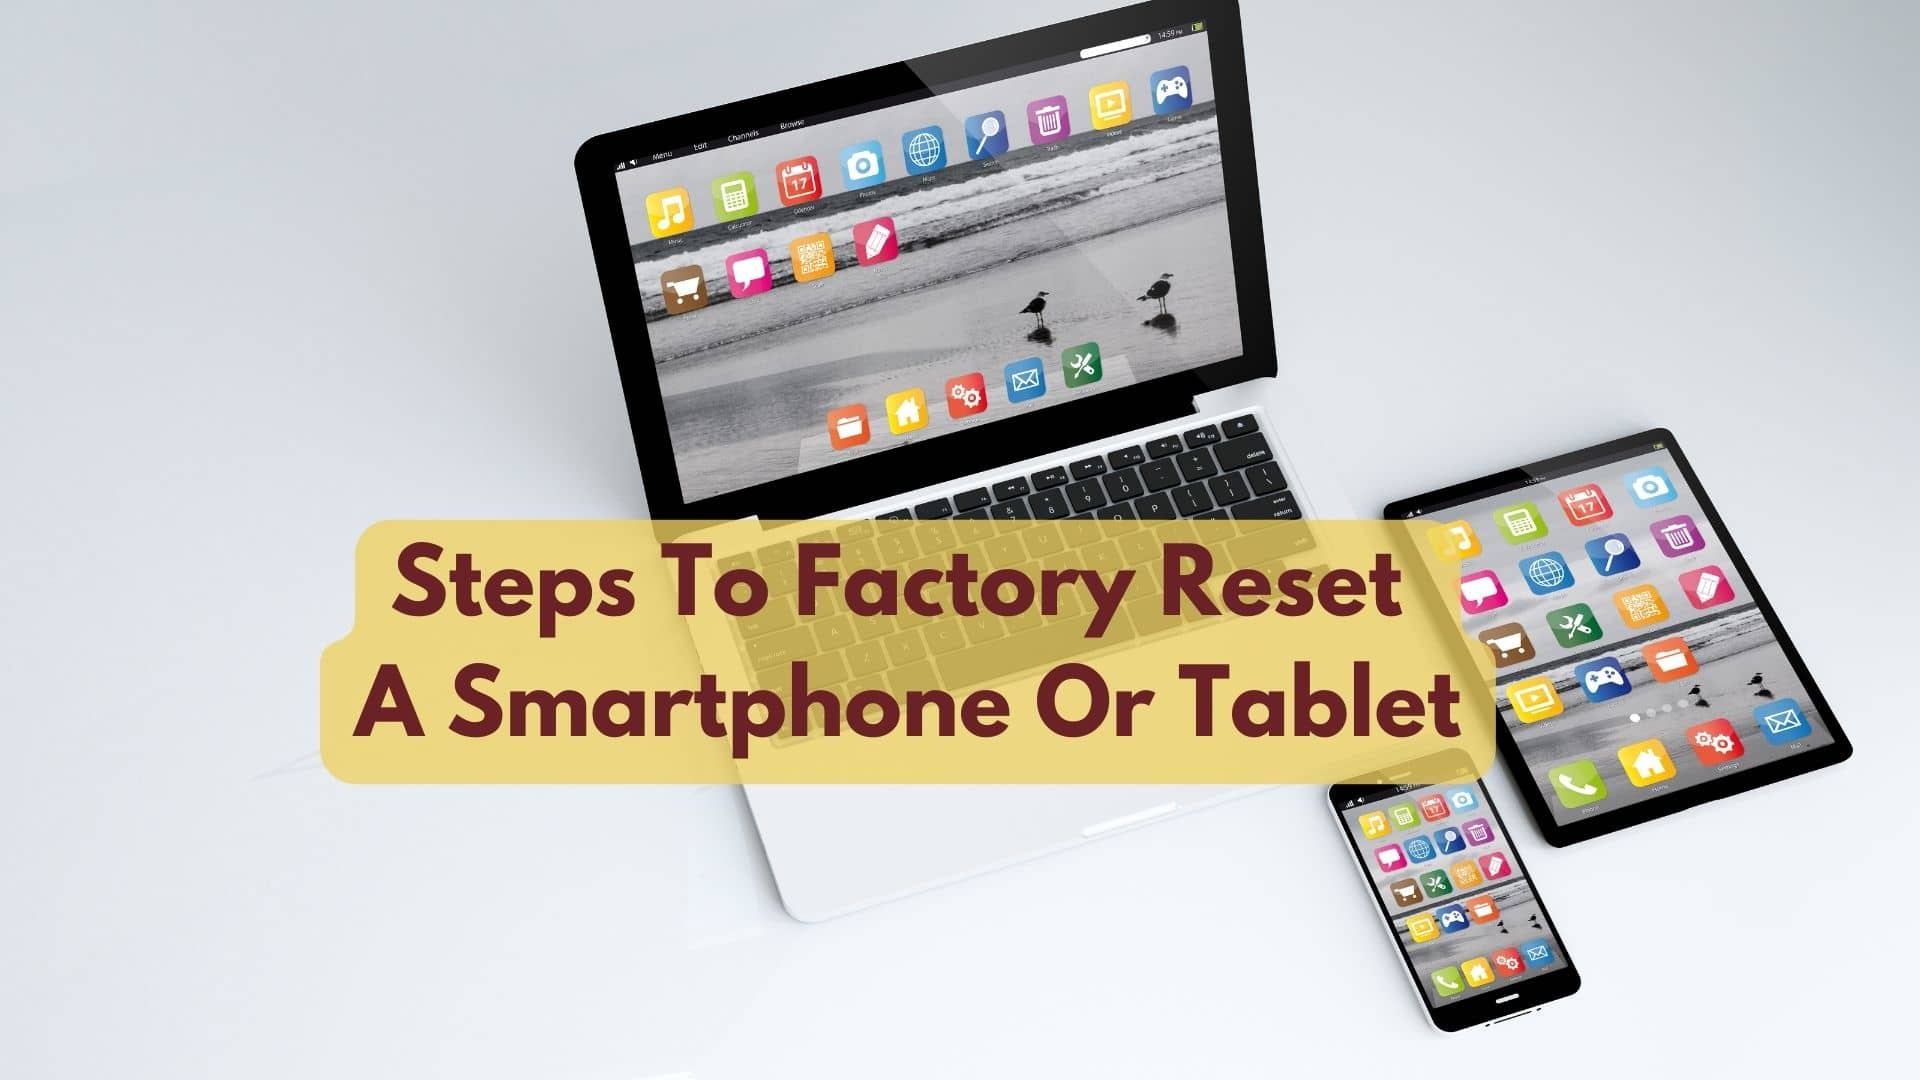 What Are The Steps To Factory Reset A Smartphone Or Tablet?